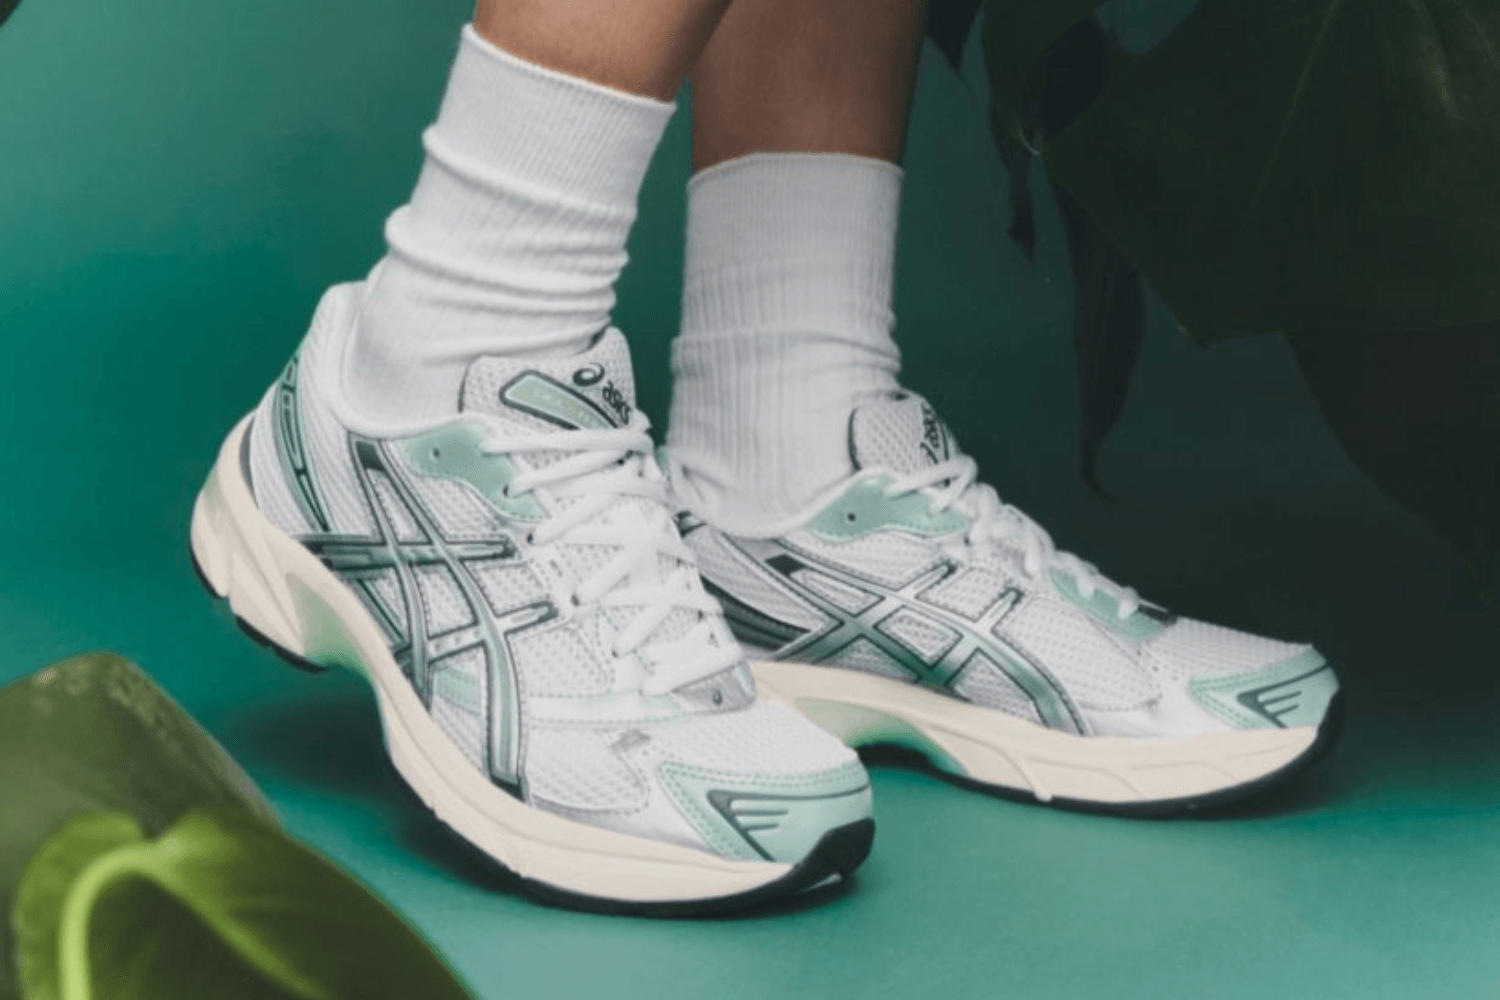 Our favourite ASICS sneakers for WMNS right now